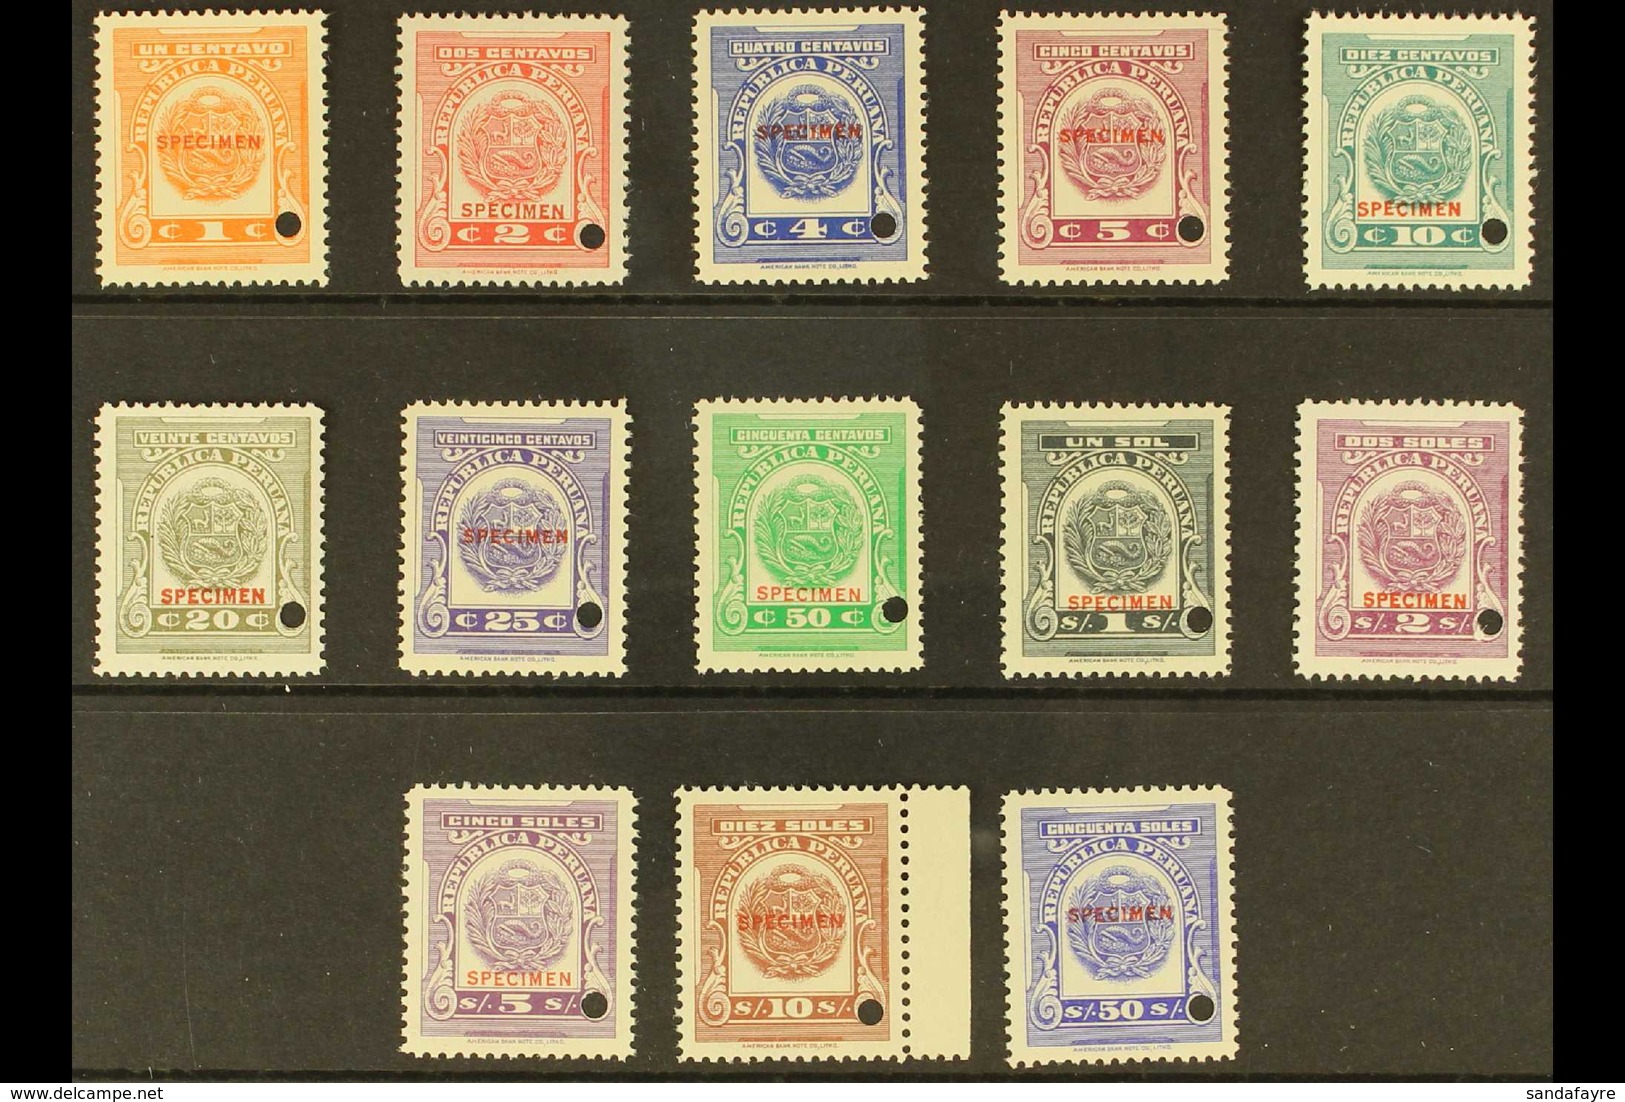 REVENUES  DOCUMENT STAMPS 1937 Complete Set With "SPECIMEN" Overprints And Small Security Punch Holes, Never Hinged Mint - Perù